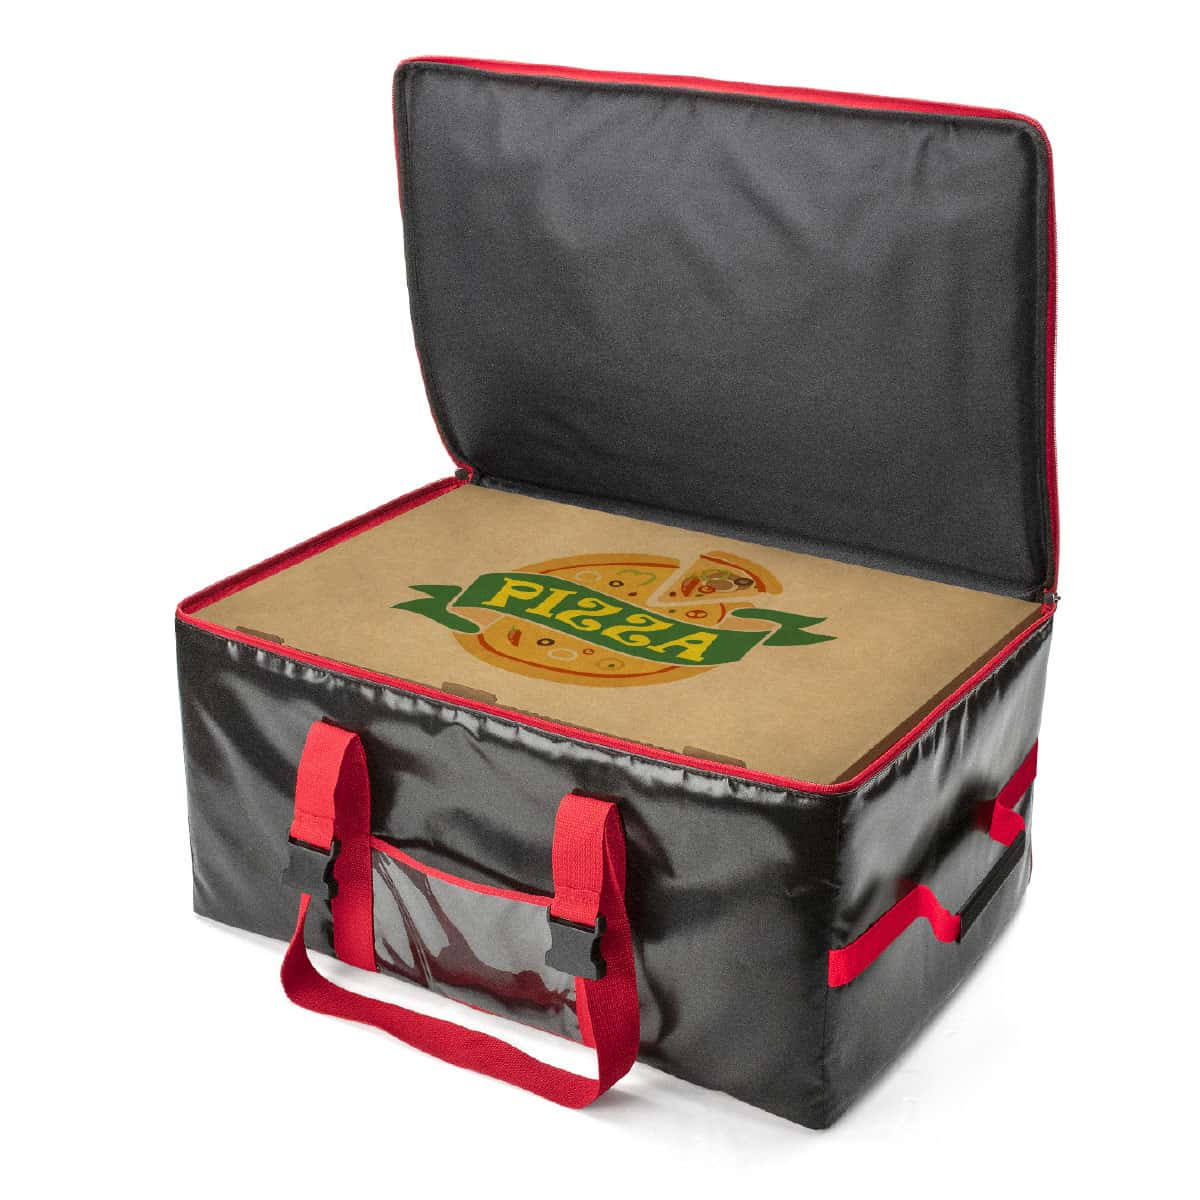 It can contain up to 5 pizza boxes measuring 60x40 cm